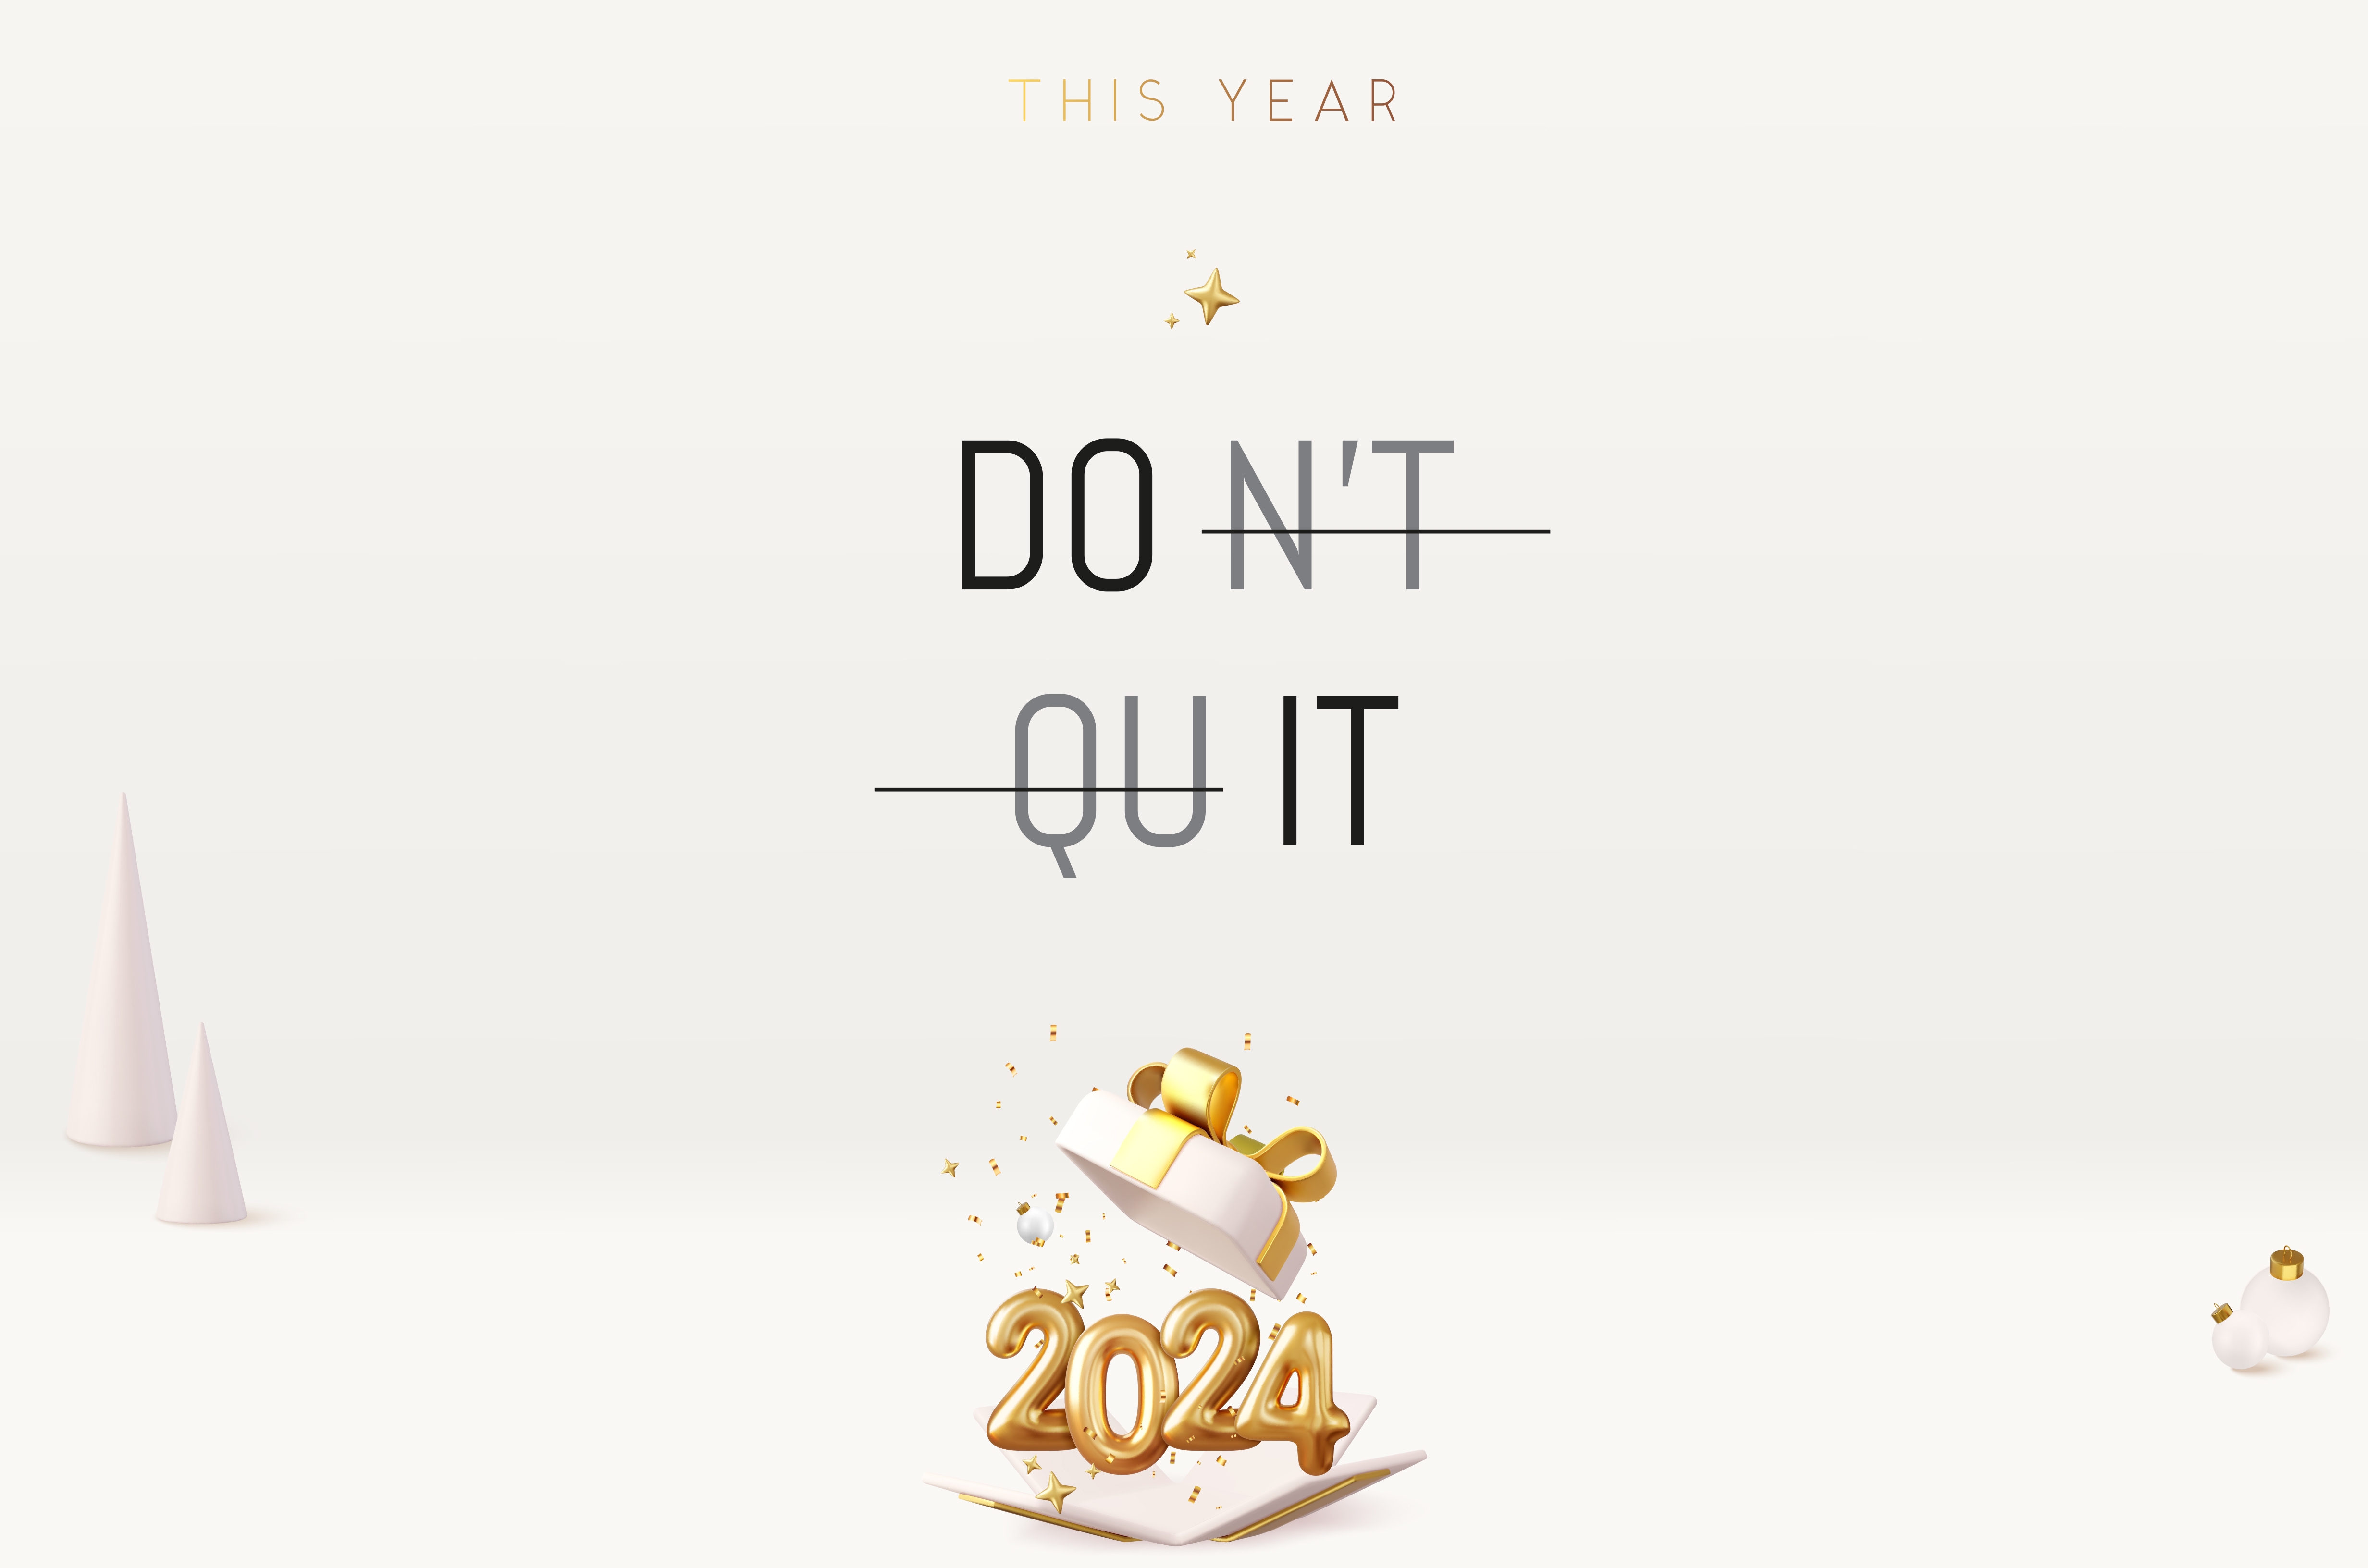 this year don't quit - business goals for 2024